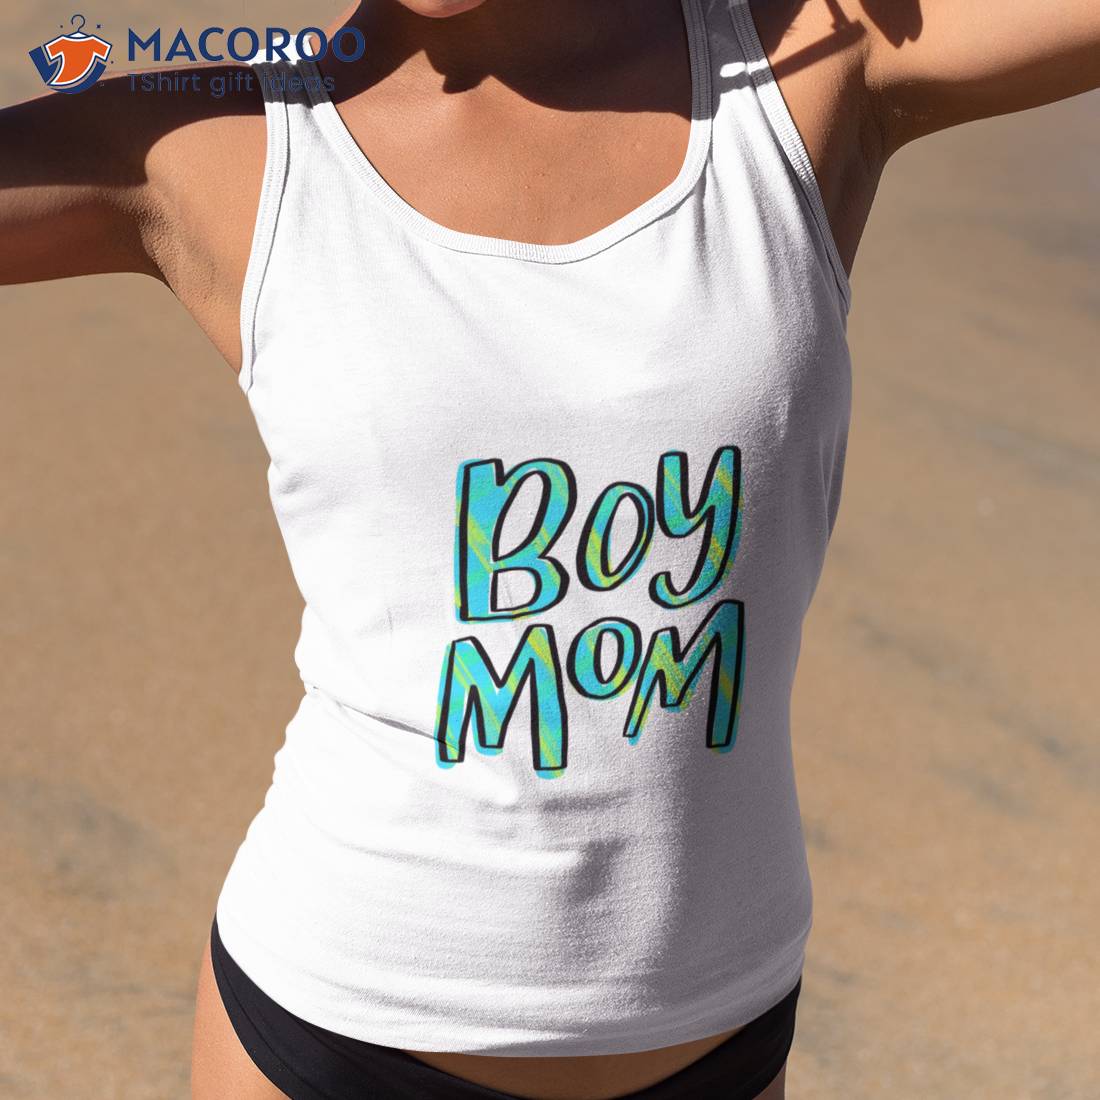 https://images.macoroo.com/wp-content/uploads/2023/05/boy-mom-t-shirt-cozy-gifts-for-mom-tank-top-2.jpg